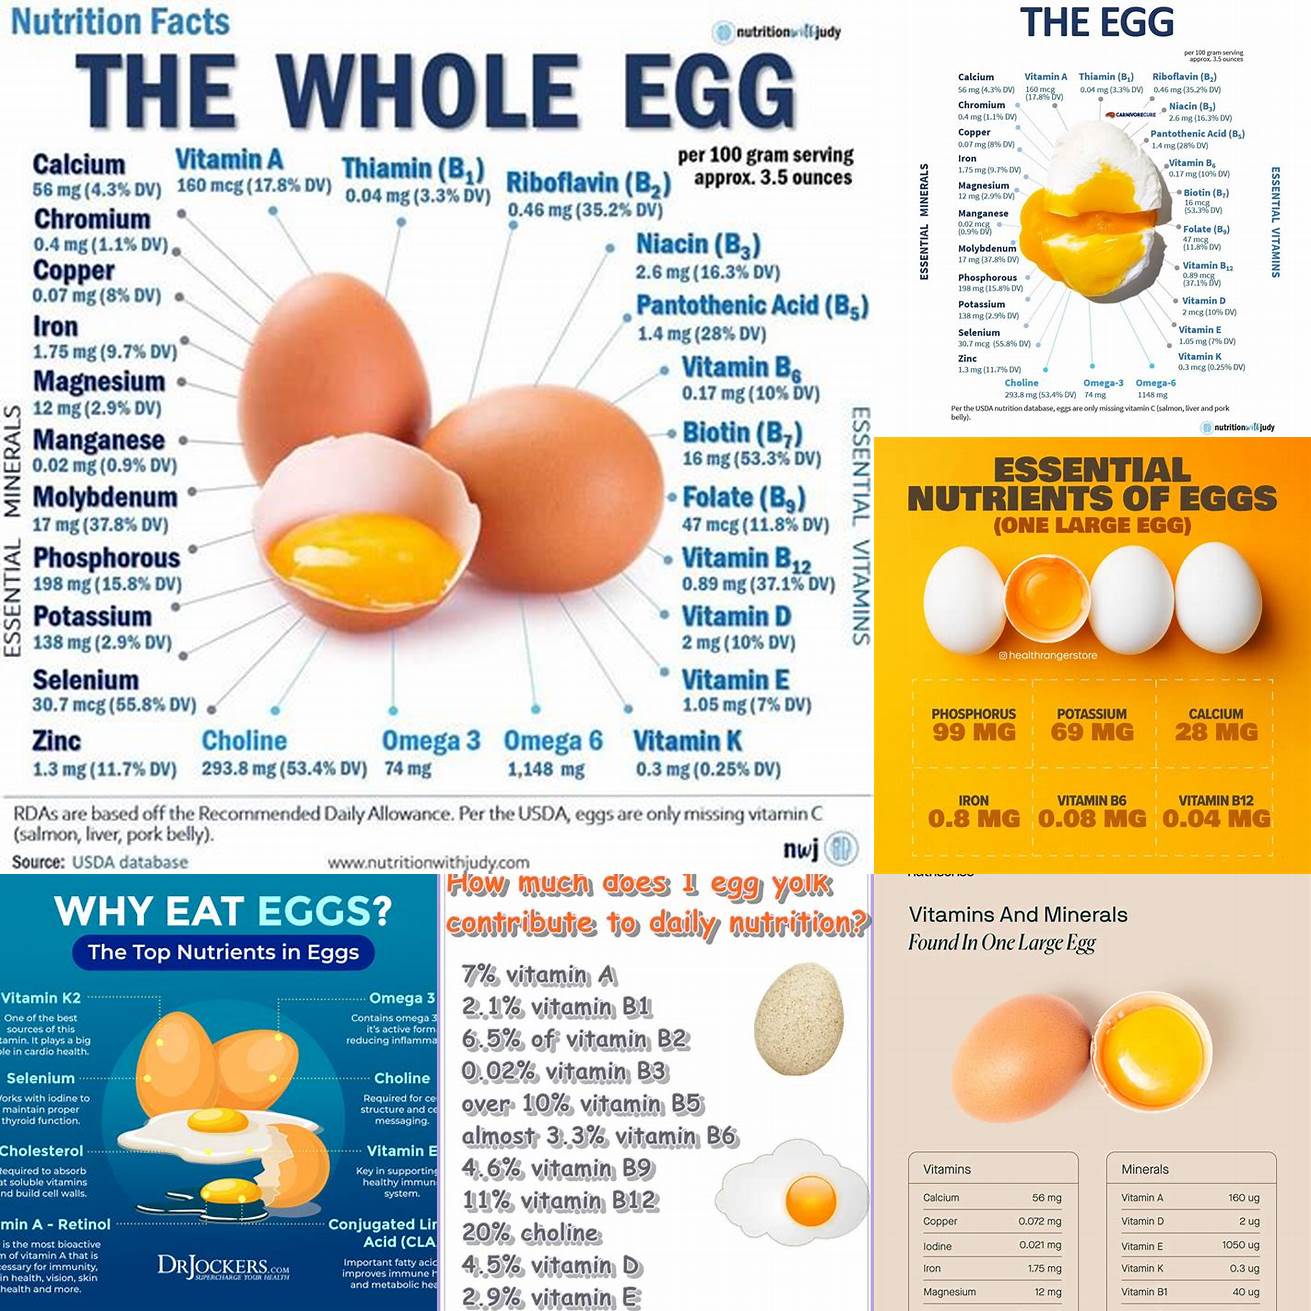 Eggs contain vitamins and minerals